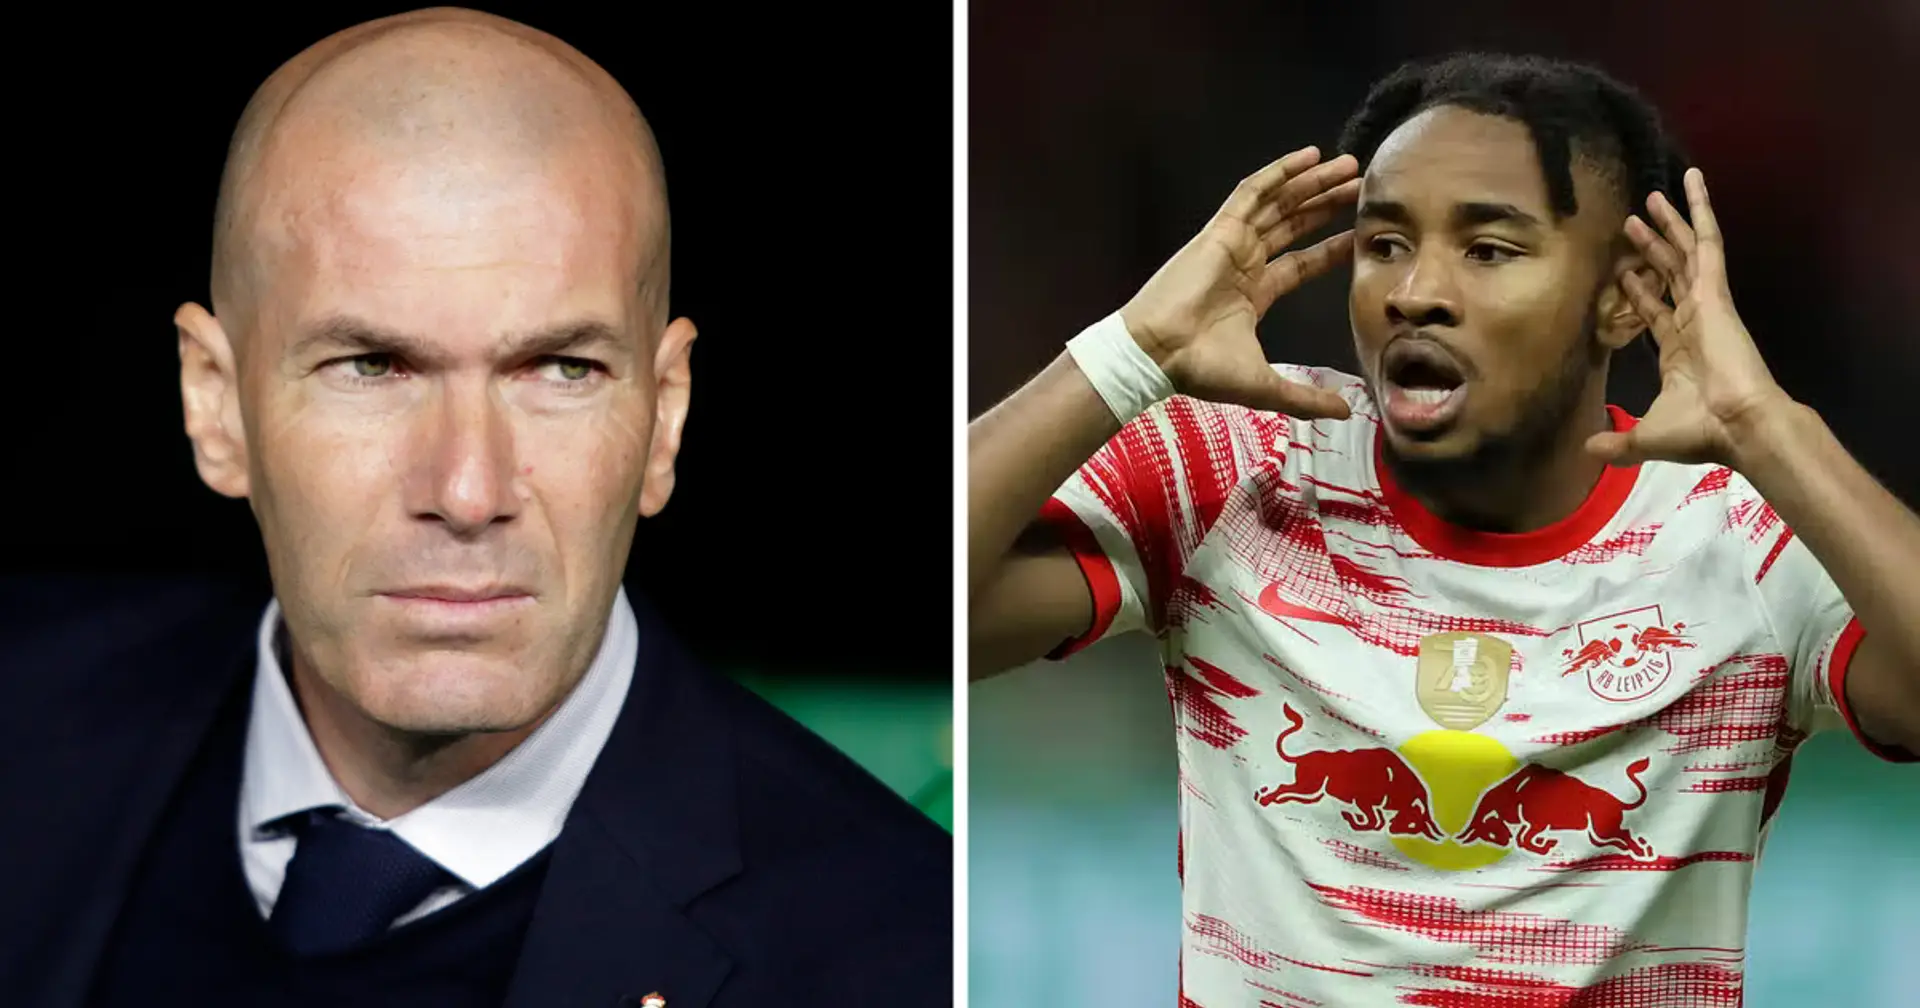 Zidane under pressure to become PSG coach and 2 more big stories you might've missed